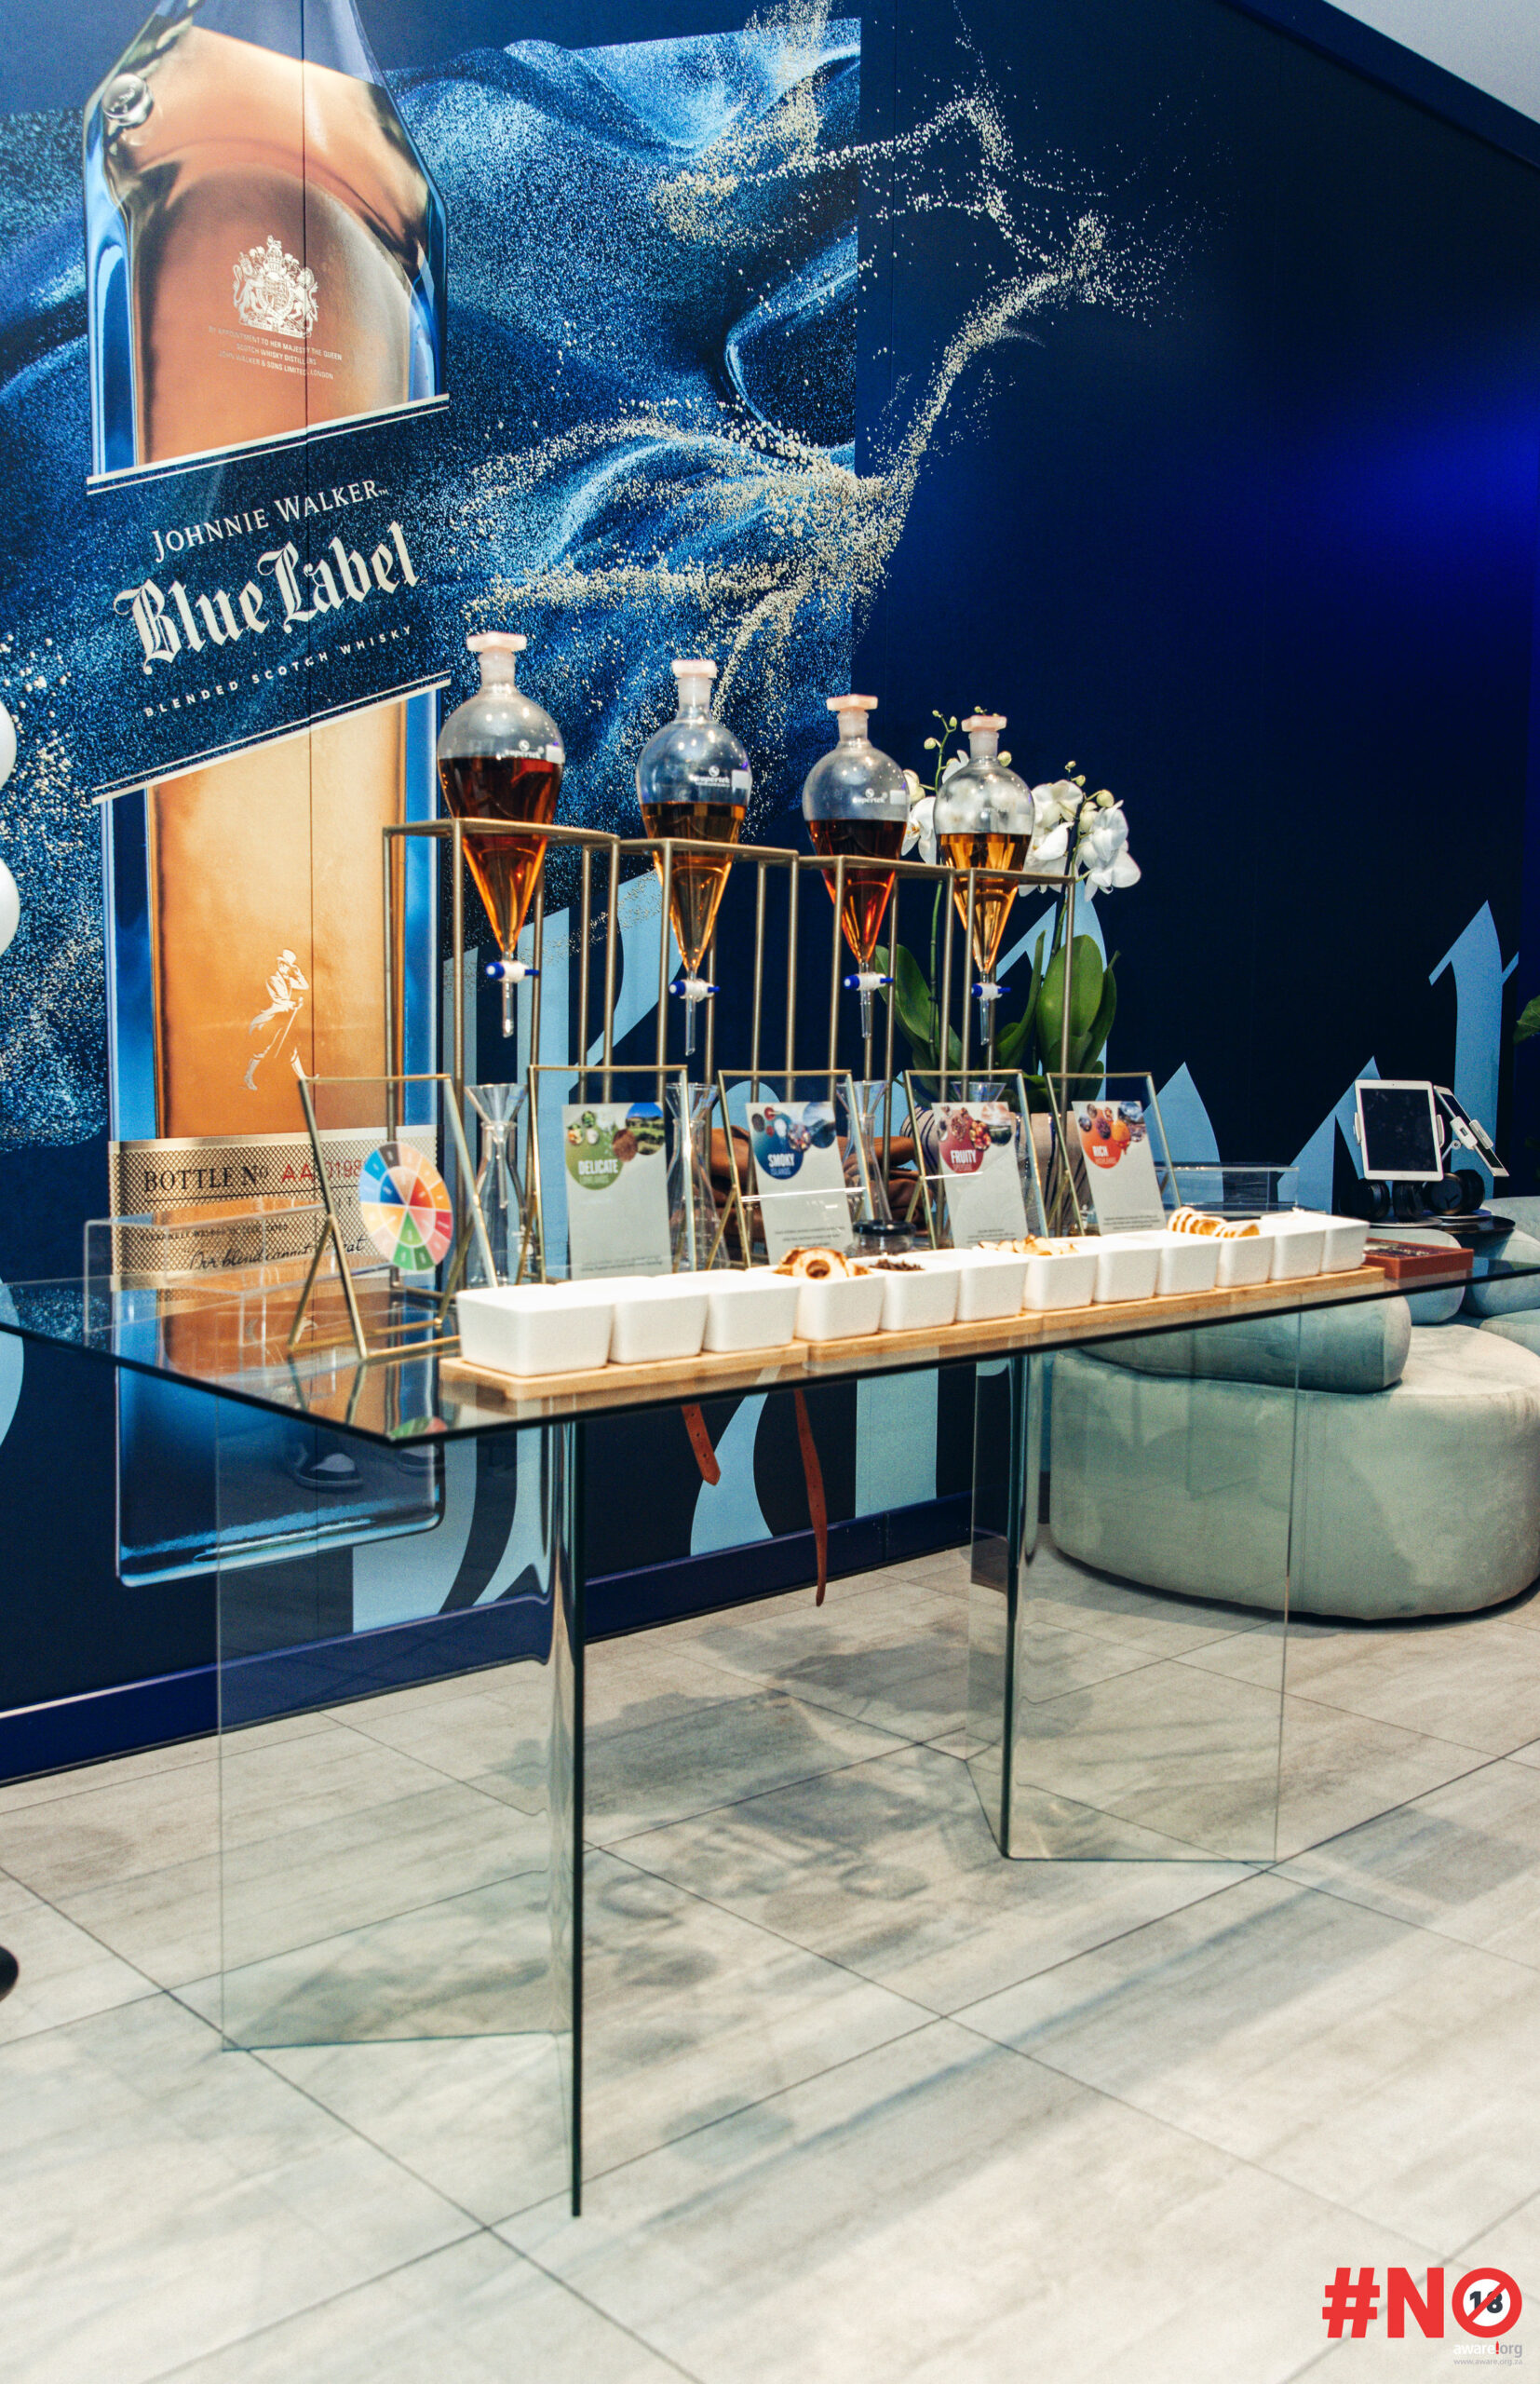 Experience the Johnnie Walker Blue Label Immersive Pop-Up at Melrose Arch